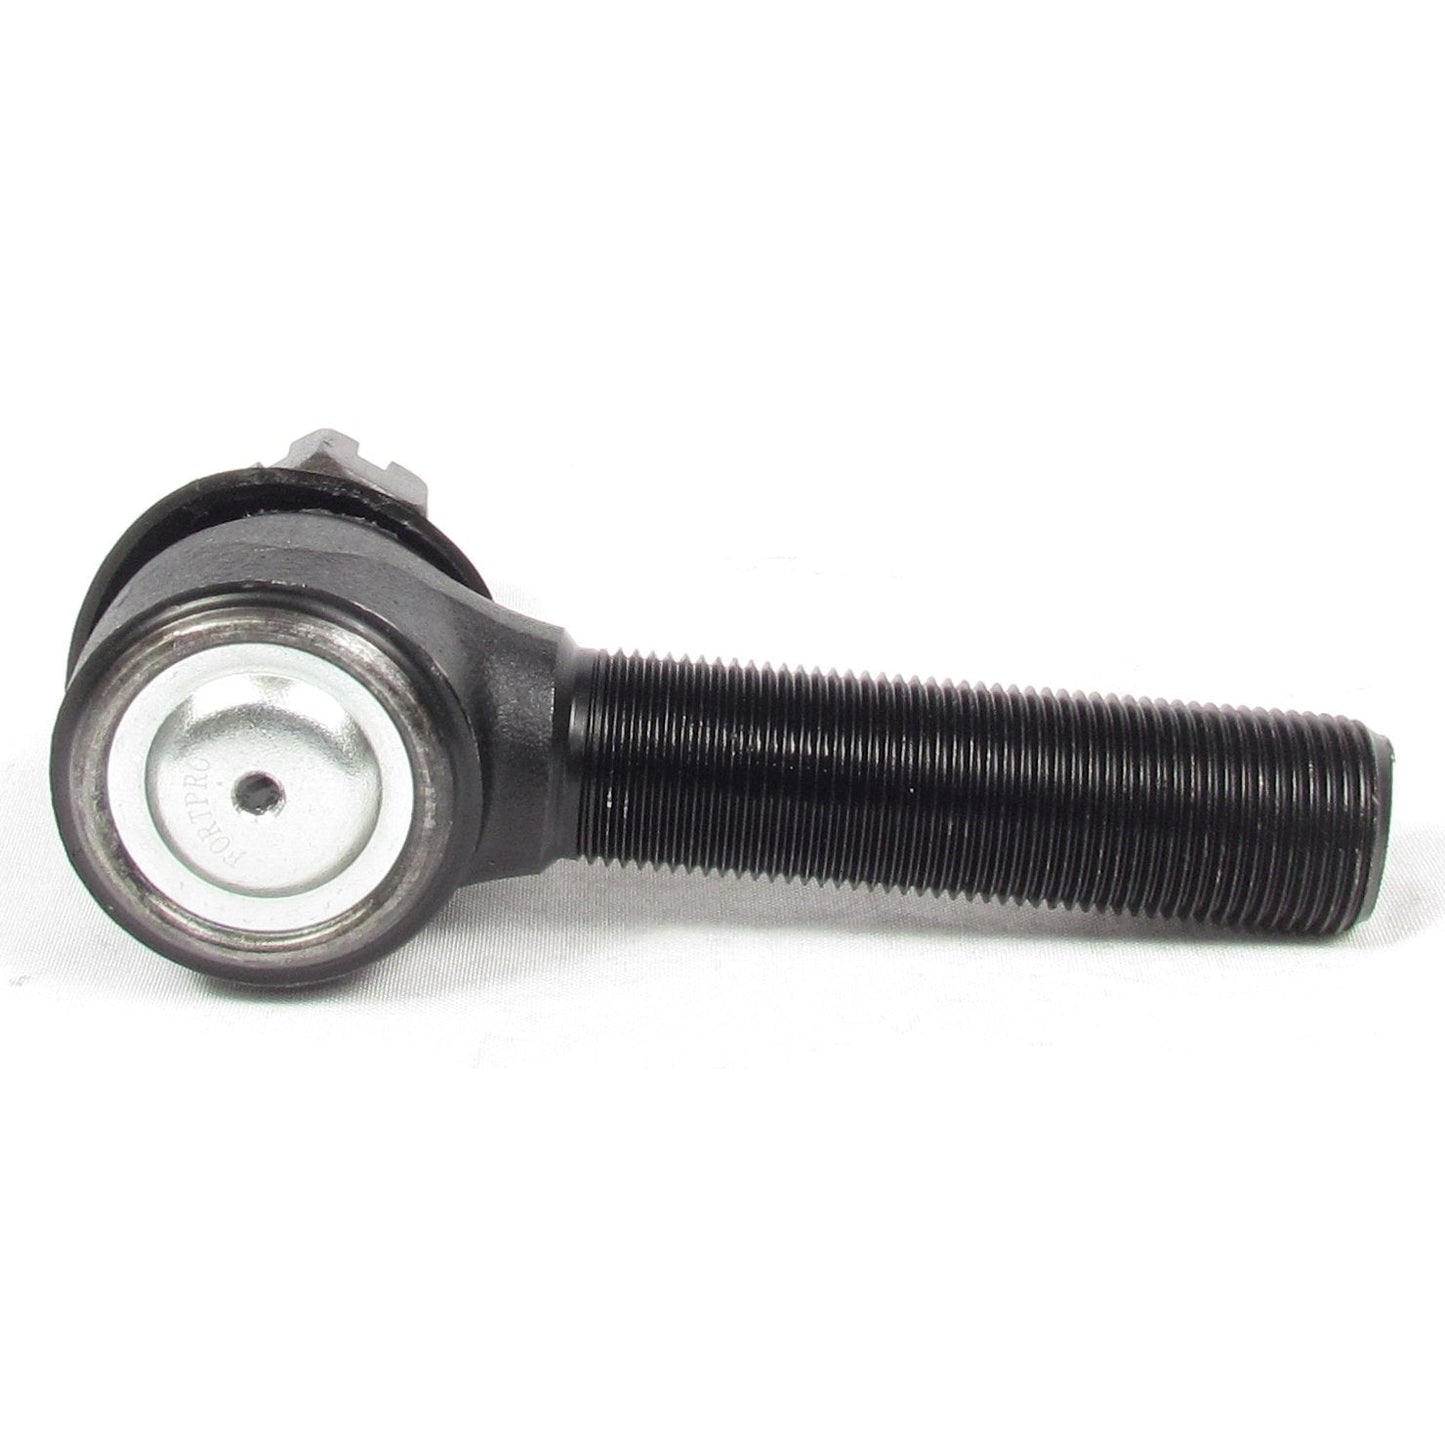 Fortpro Tie Rod End Compatible with Mack, International Replaces R230068 - Left Side | F265858